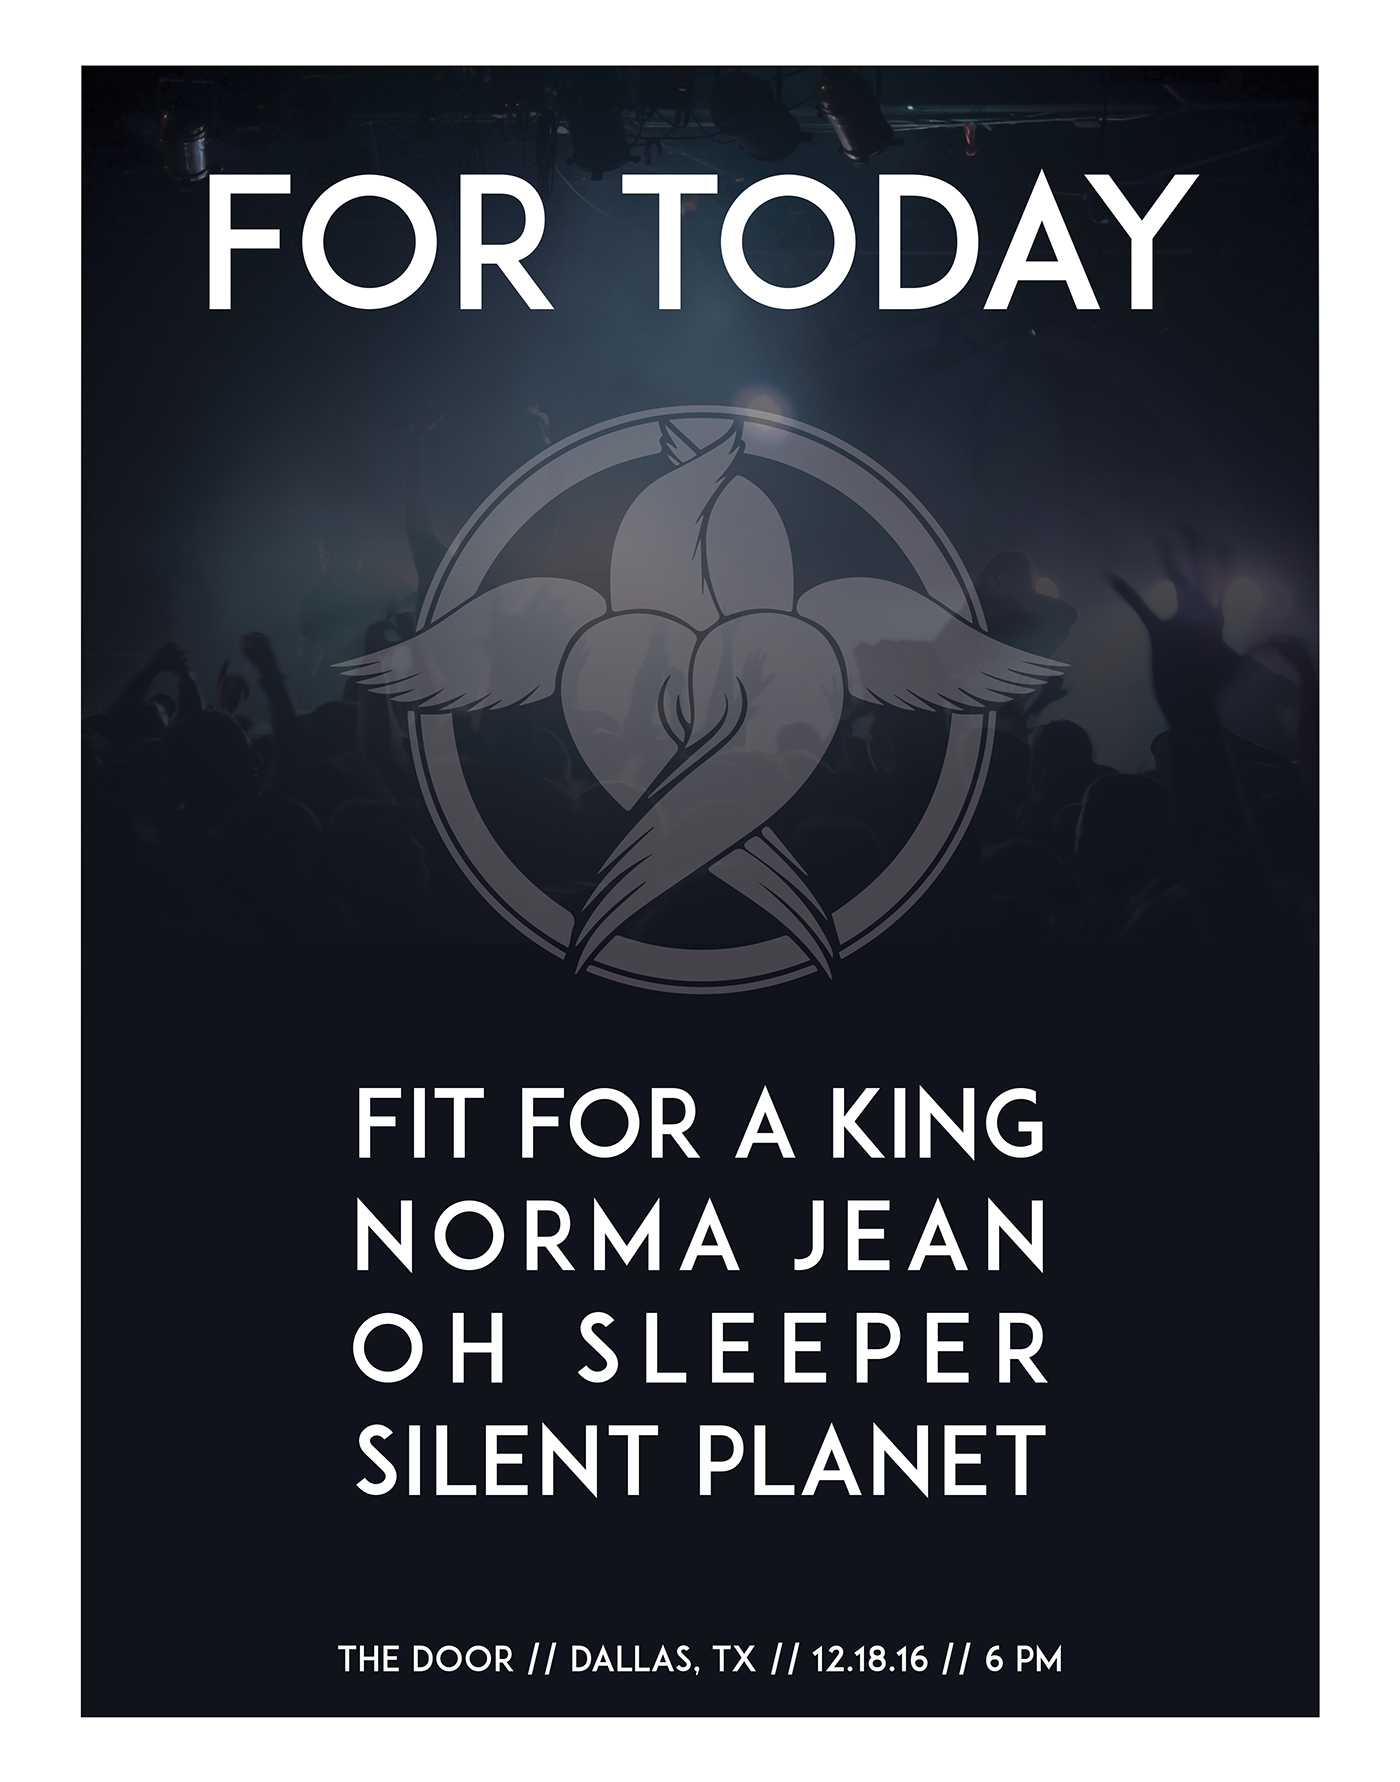 live music music concert For Today silent planet Norma Jean oh sleeper